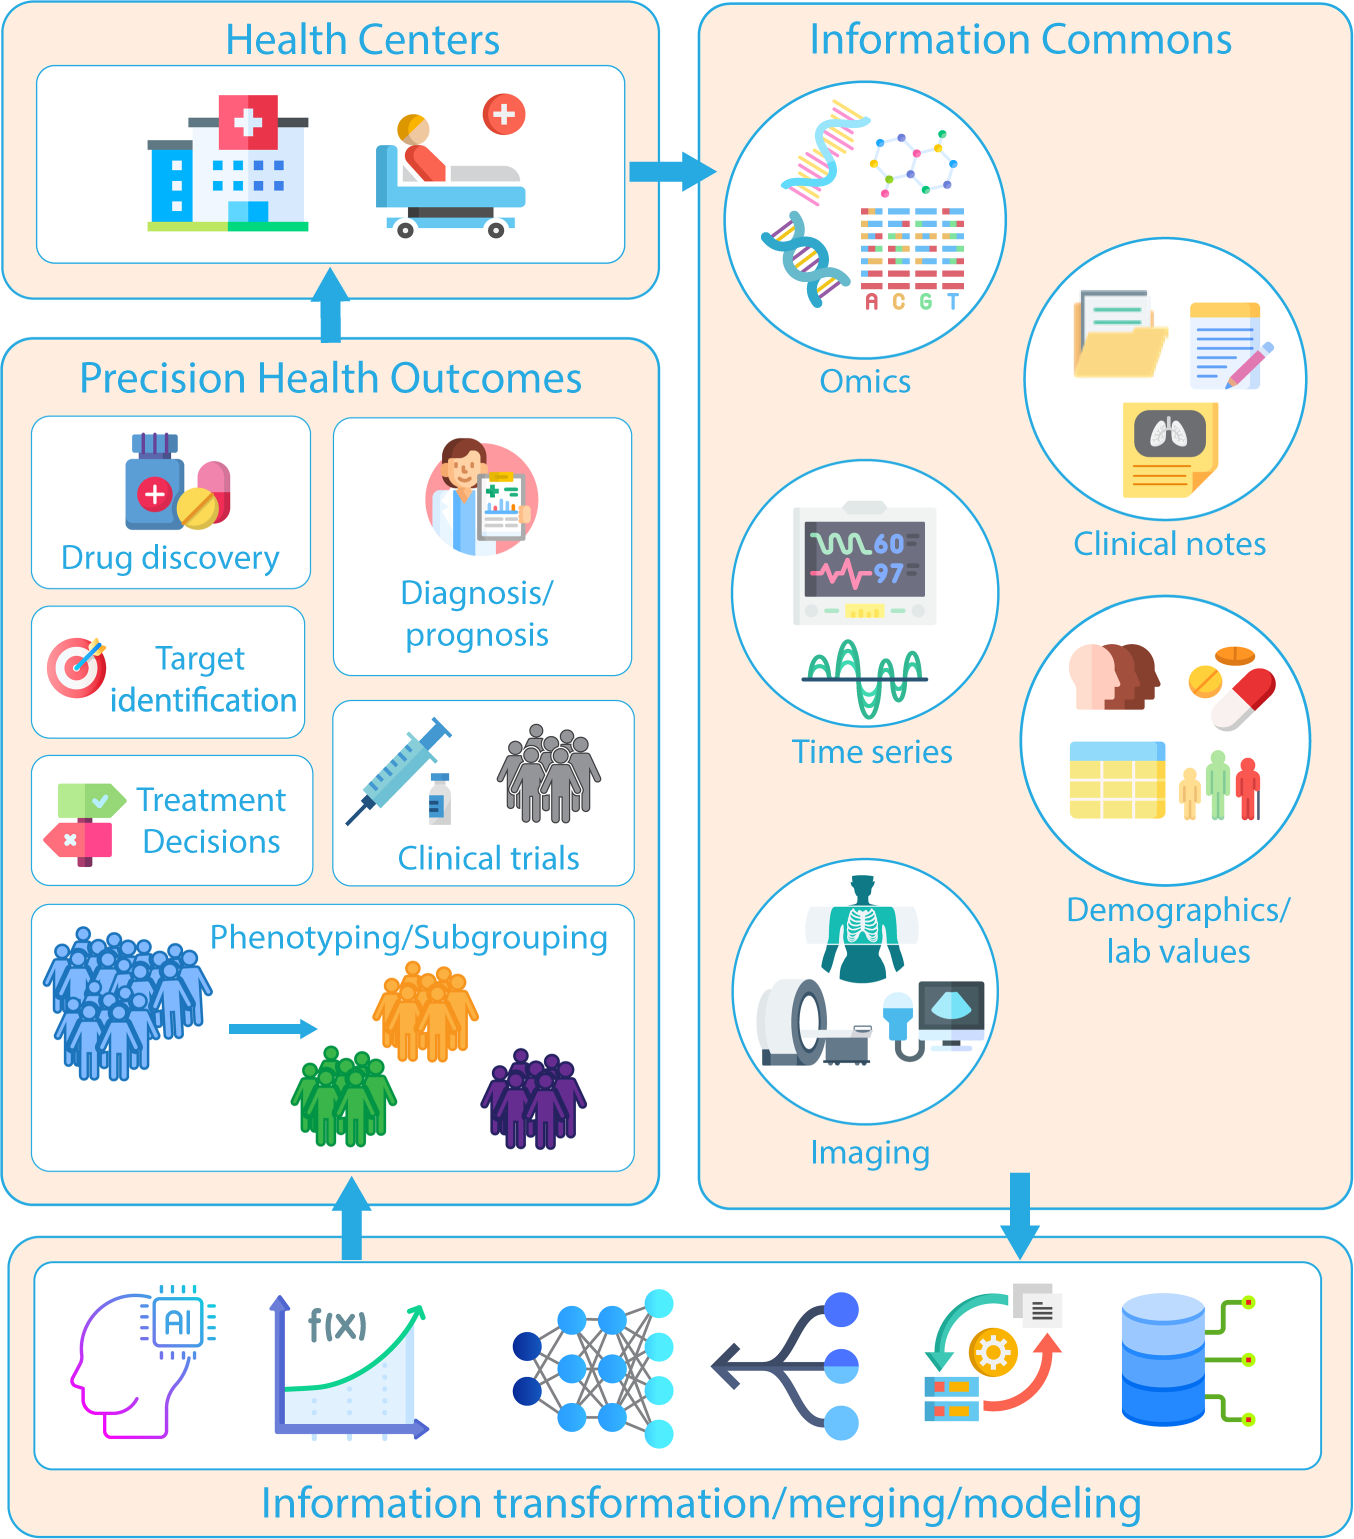 PDF) Predictive modeling of structured electronic health records for  adverse drug event detection